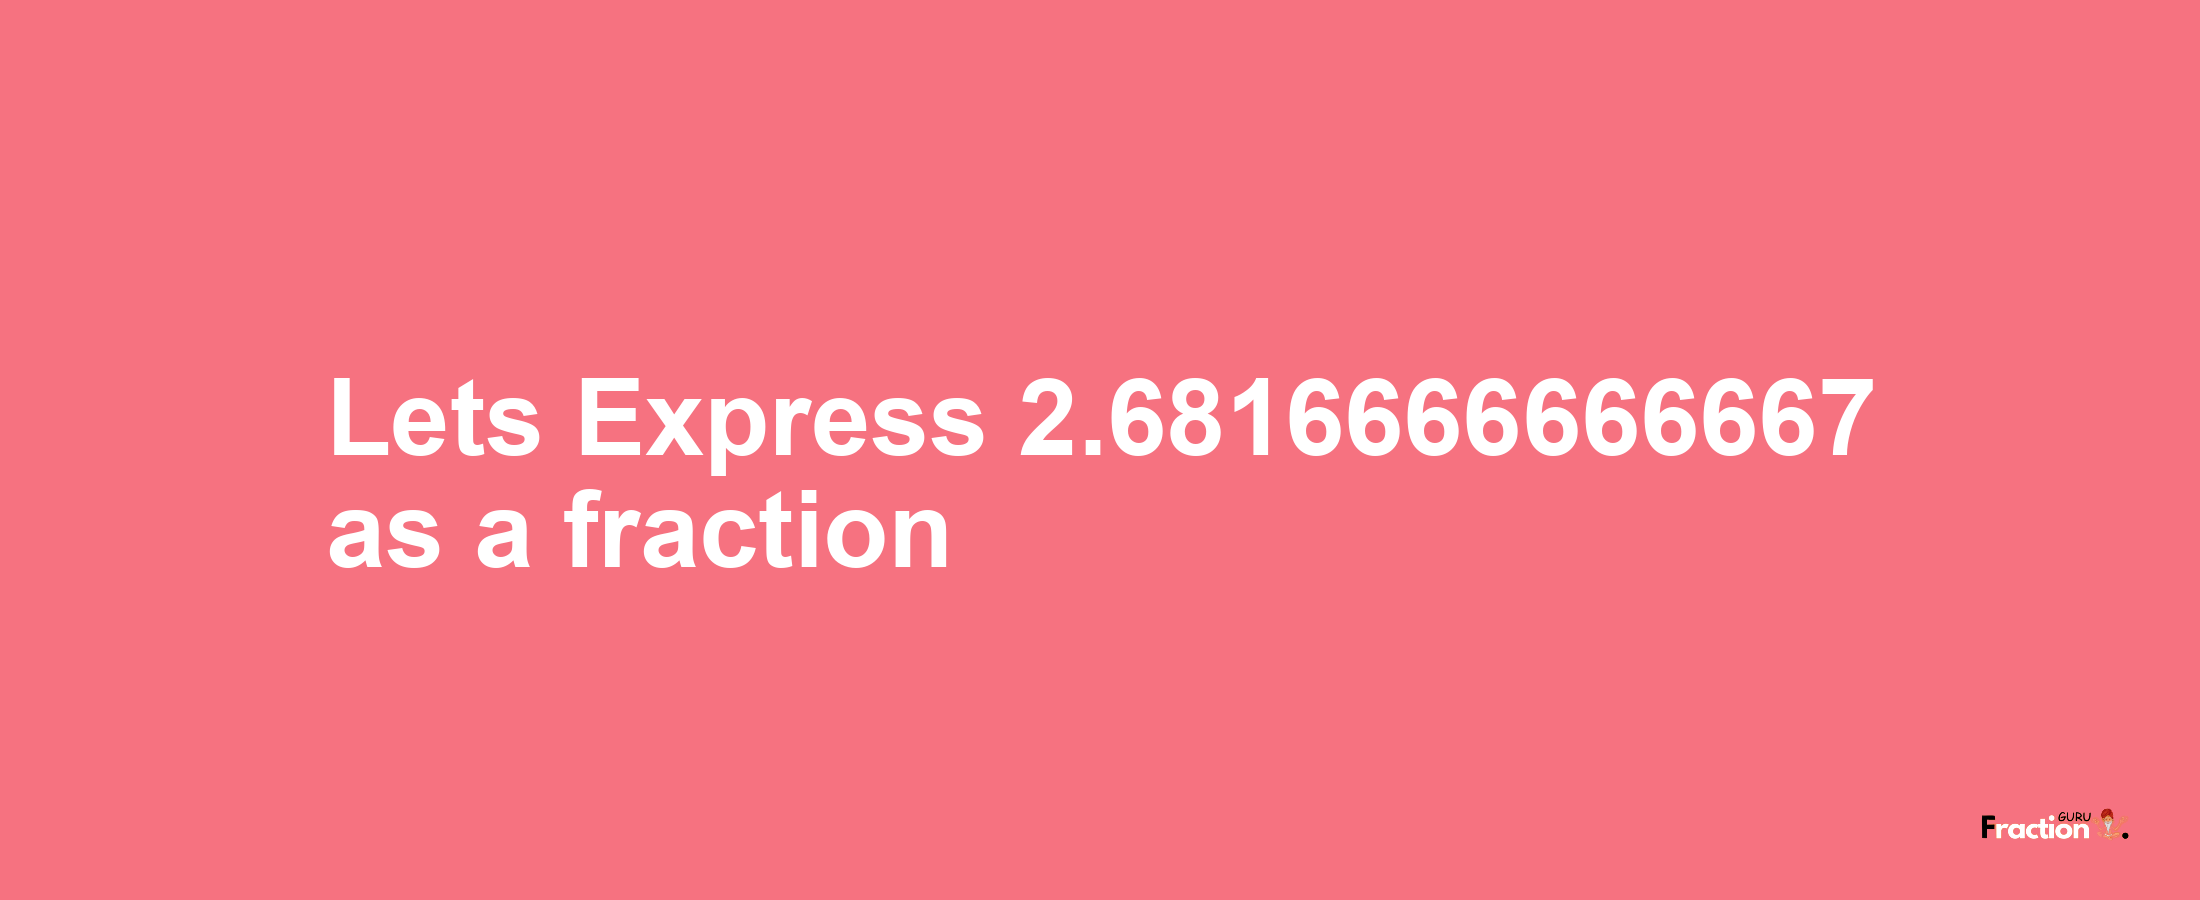 Lets Express 2.6816666666667 as afraction